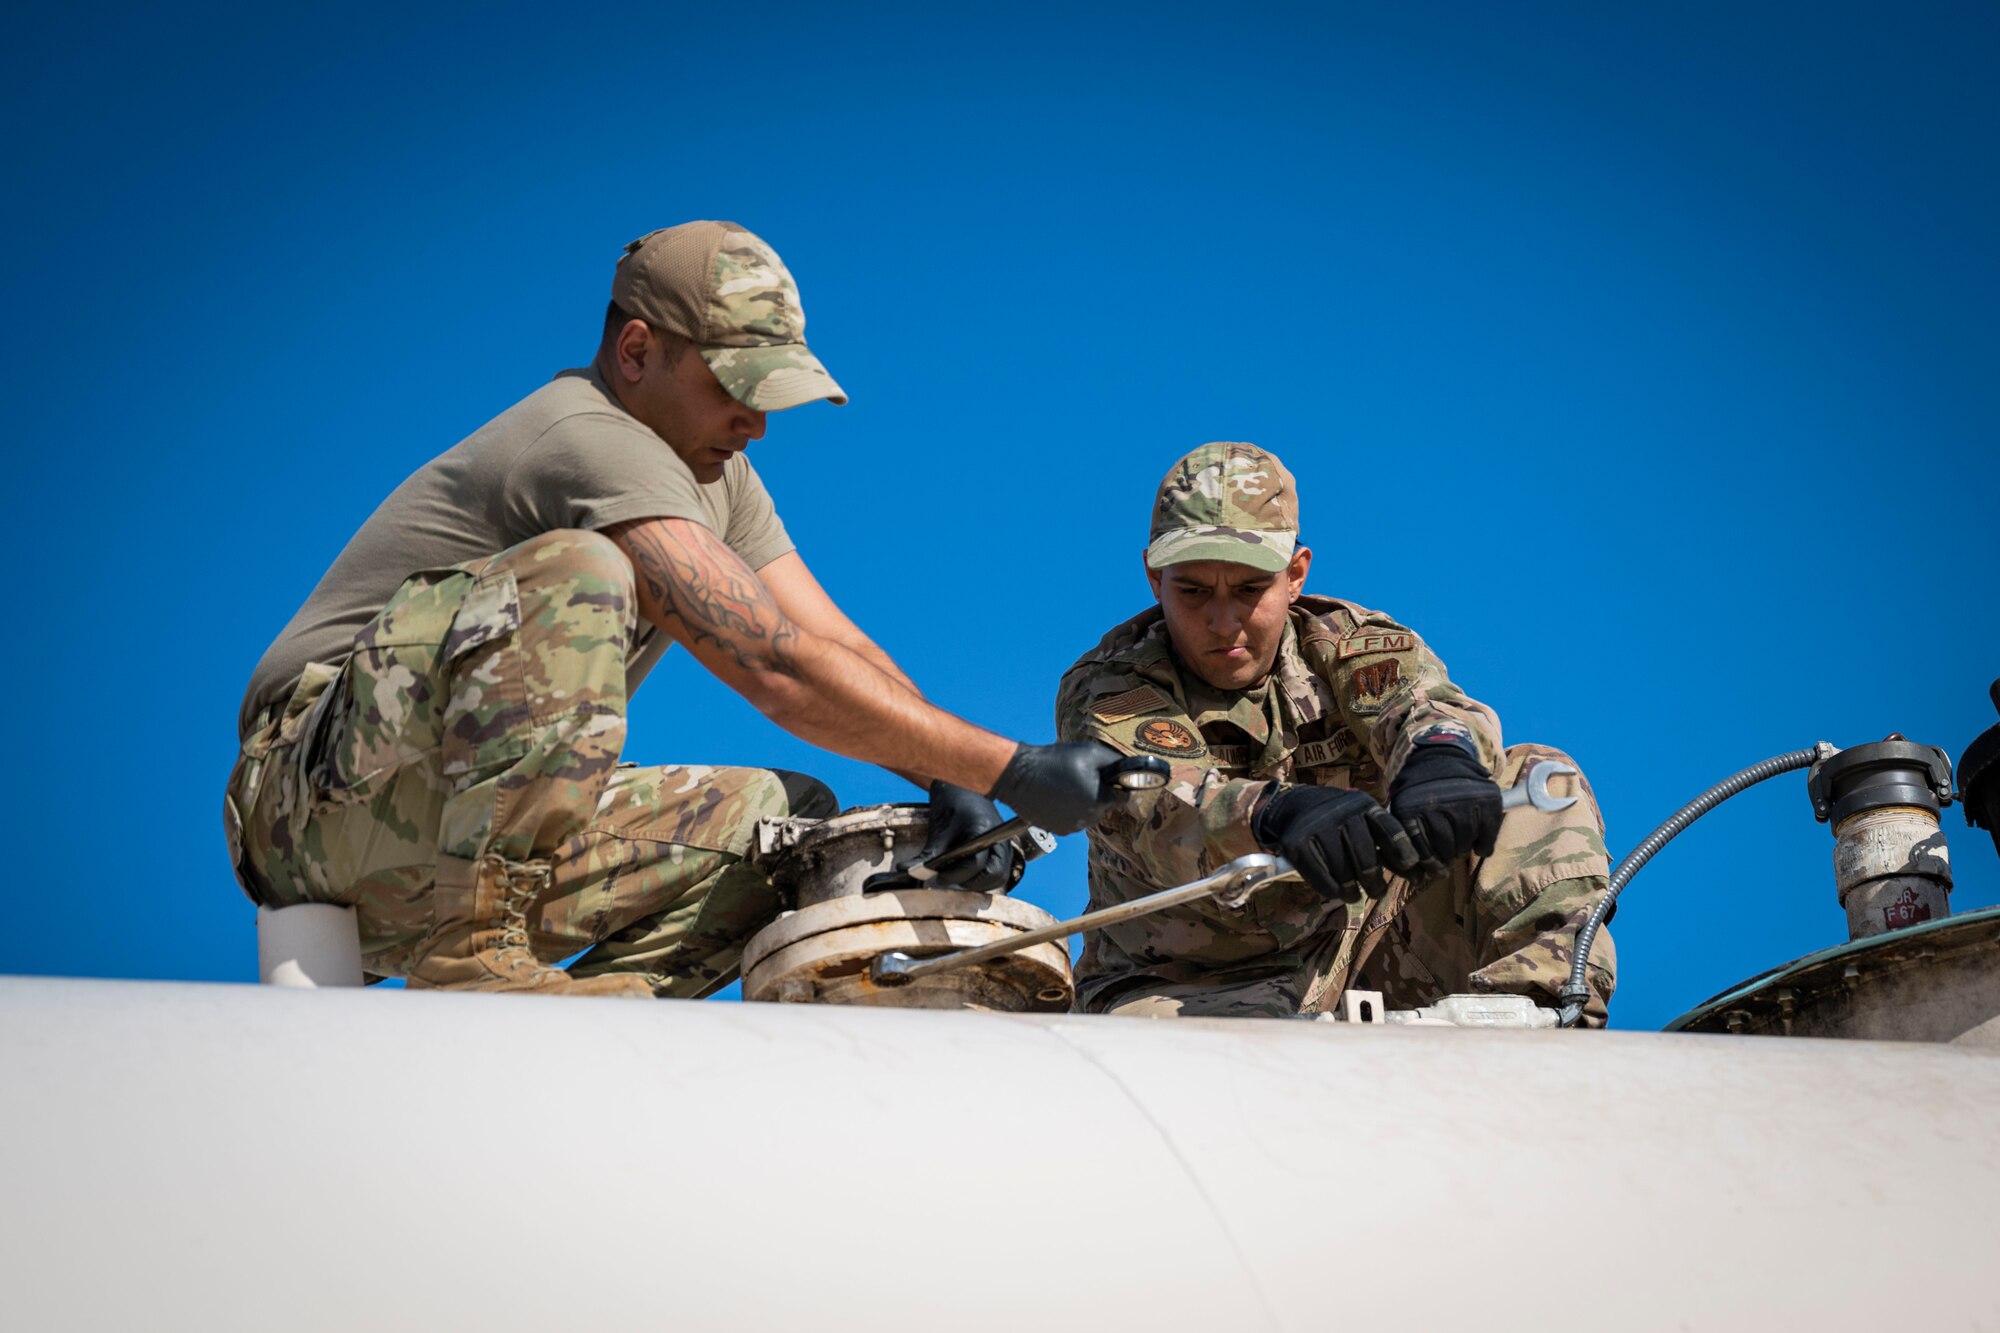 Senior Airman Justin Bellivan, left, and Staff Sgt. Christian Munoz-Alvarez, 4th Civil Engineer Squadron liquid fuels maintenance technicians, replace an emergency vent on a fuel tank at Seymour Johnson Air Force Base, North Carolina, Dec. 13, 2022. The replacement was made to keep the fuel tanks up to standard.